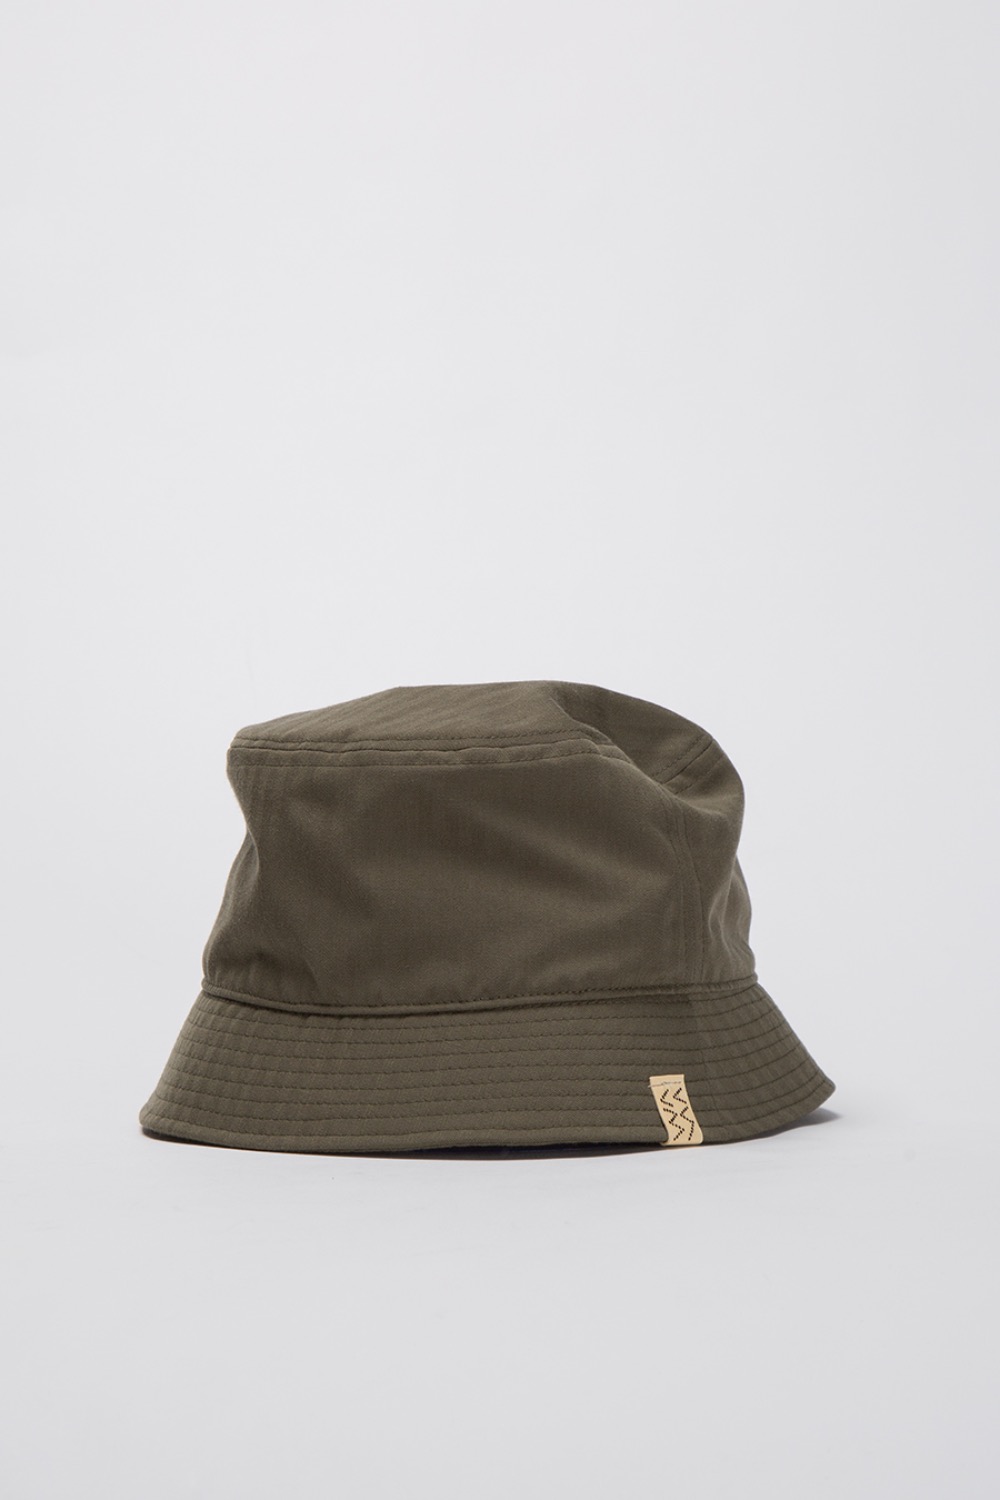 DOME BACKET HAT(W/L) OLIVE